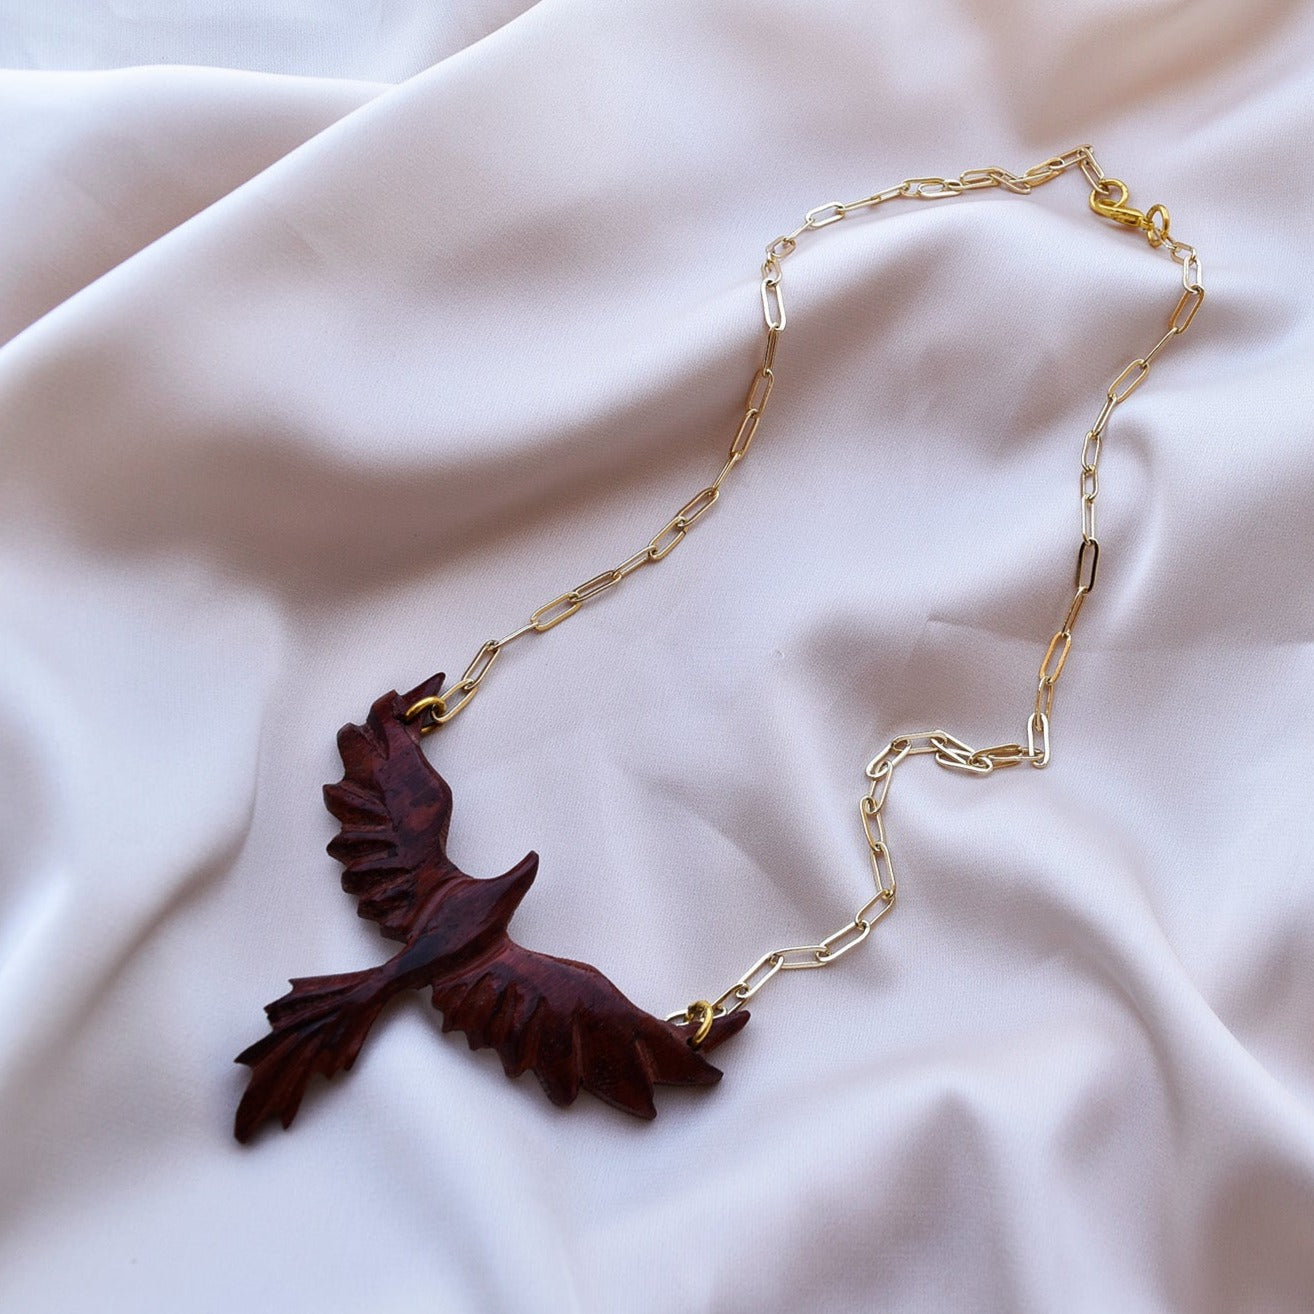 Witty, lively, and friendly. Like the spirit of the sparrow, a person who wears this necklace would go out of your way to make the people around you happy